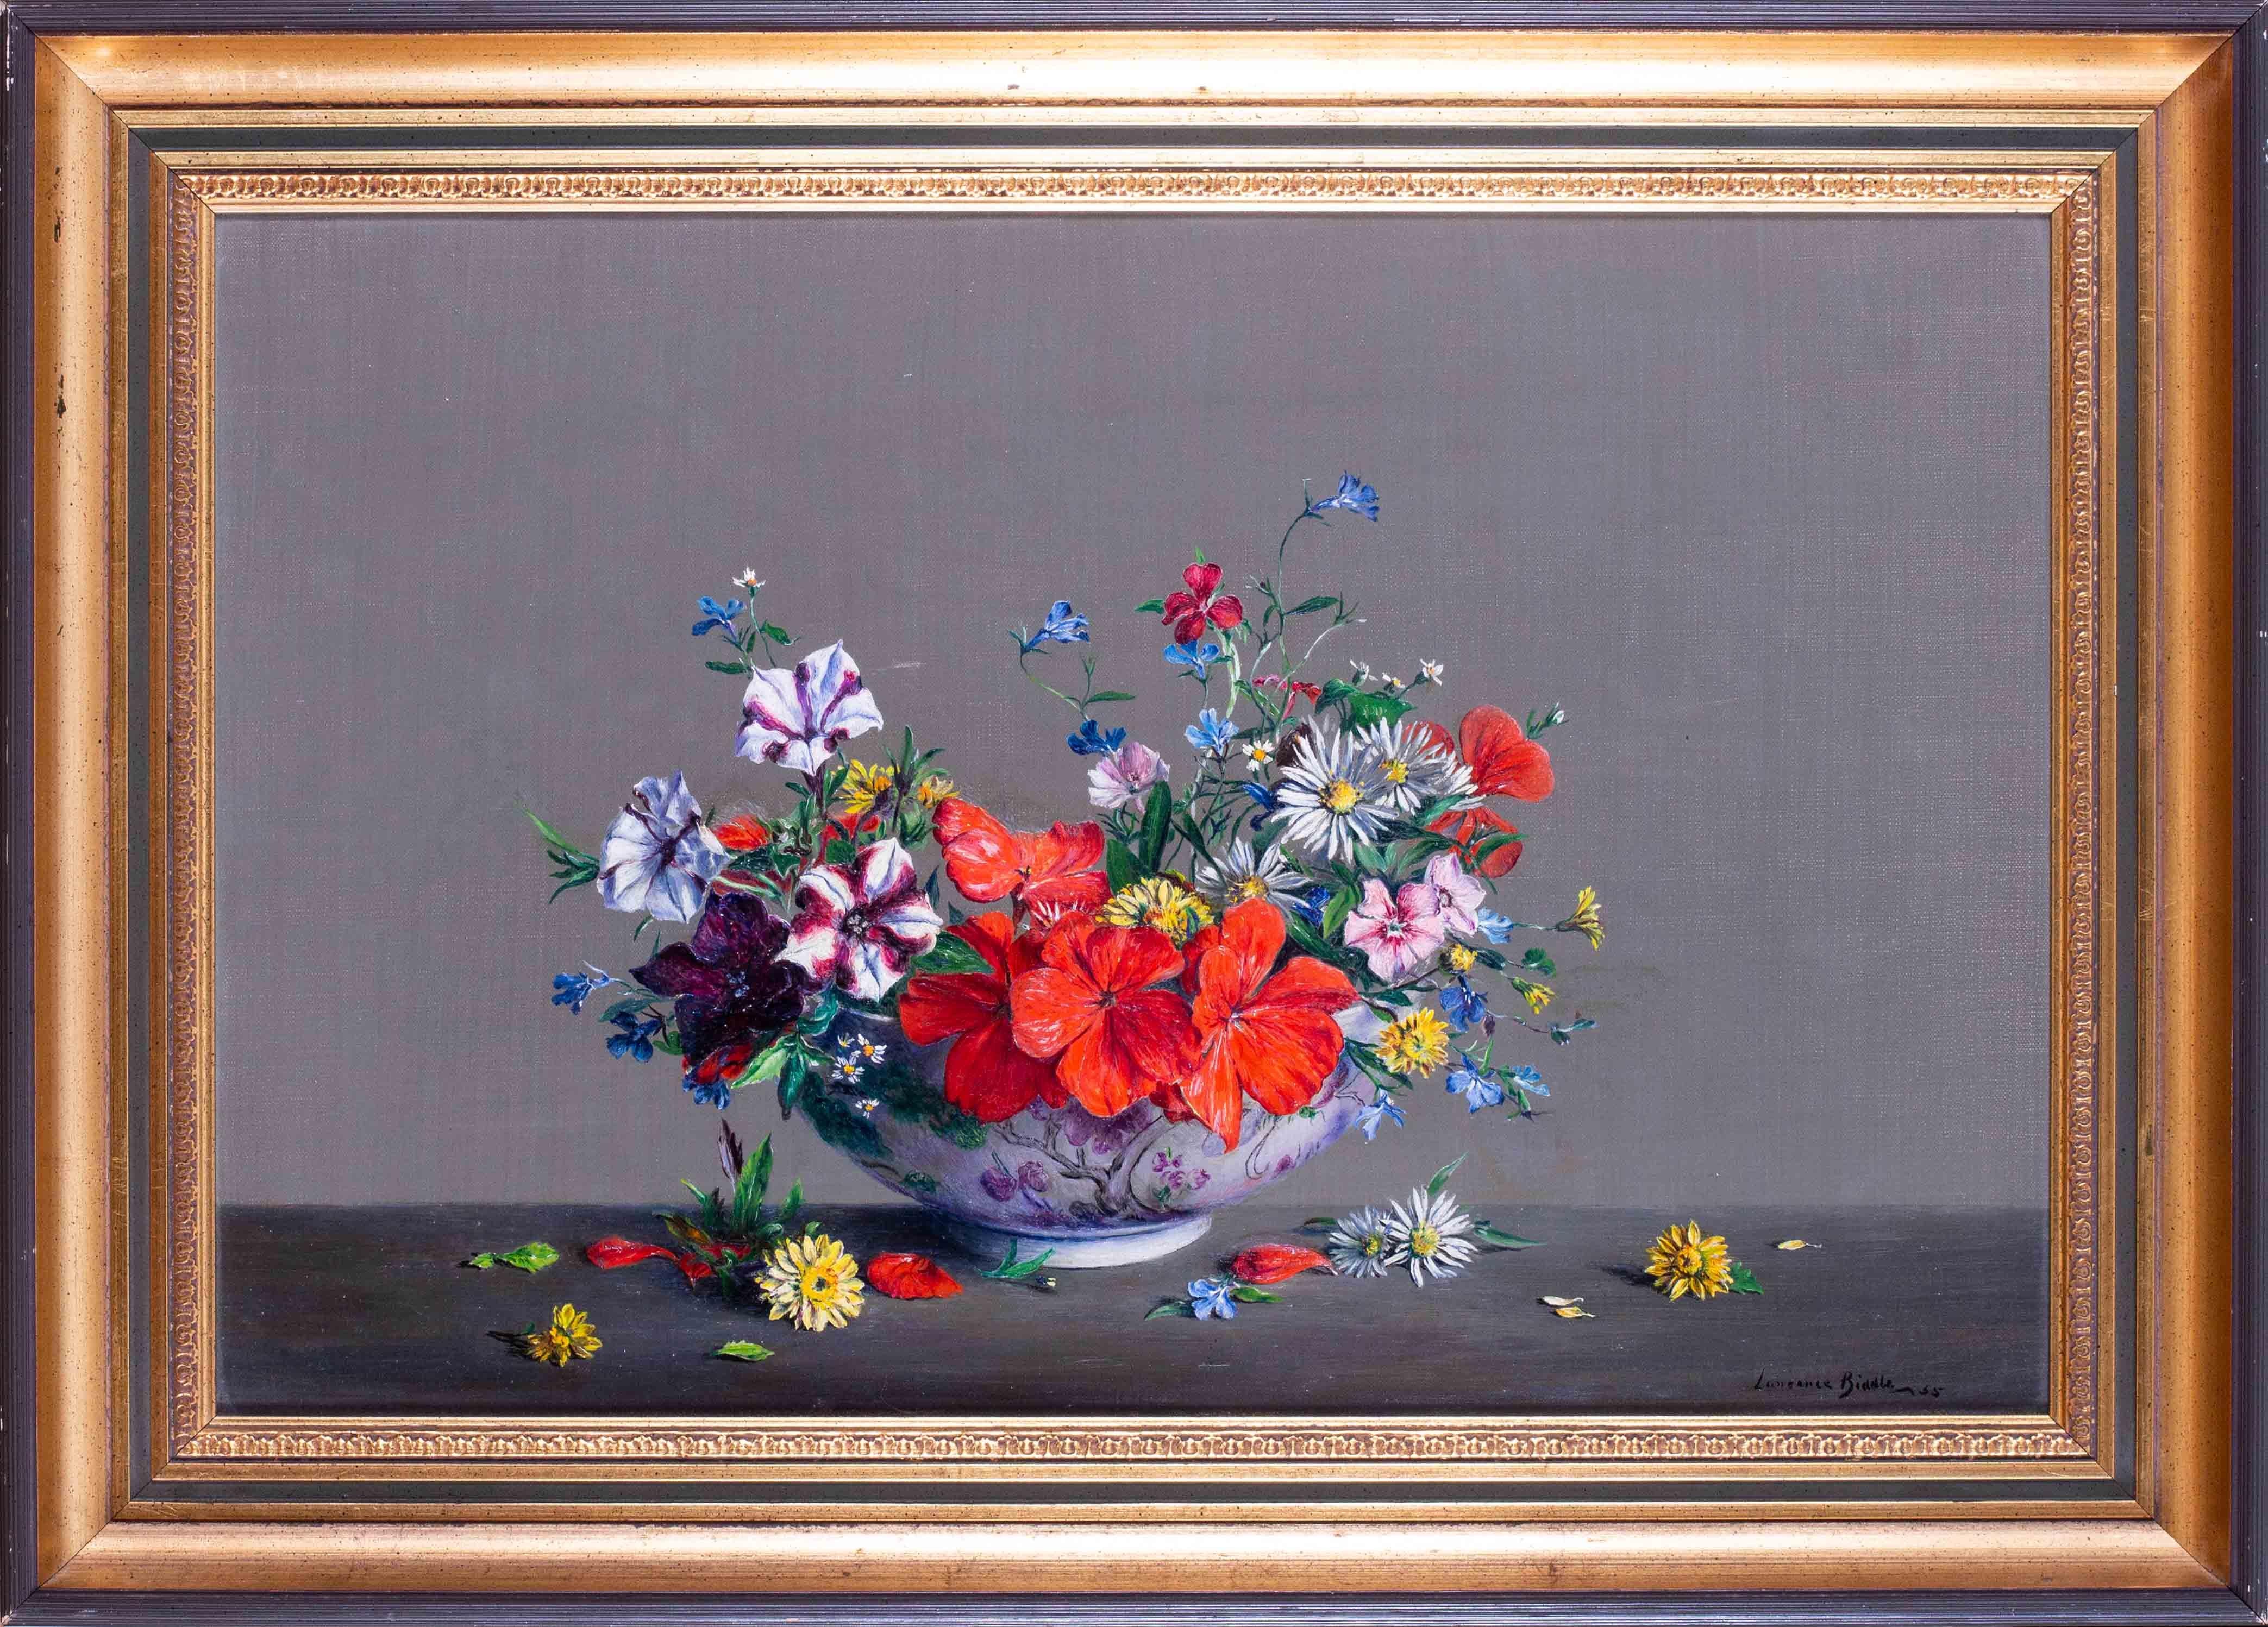 An esquisitively detailed and beautifully portrayed vase of flowers that include Petunias, Geraniums, Michaelmas Daisies and other summer blooms by early 20th Century British artist Lawrence Biddle. Laurence Biddle was an artist who specialised in